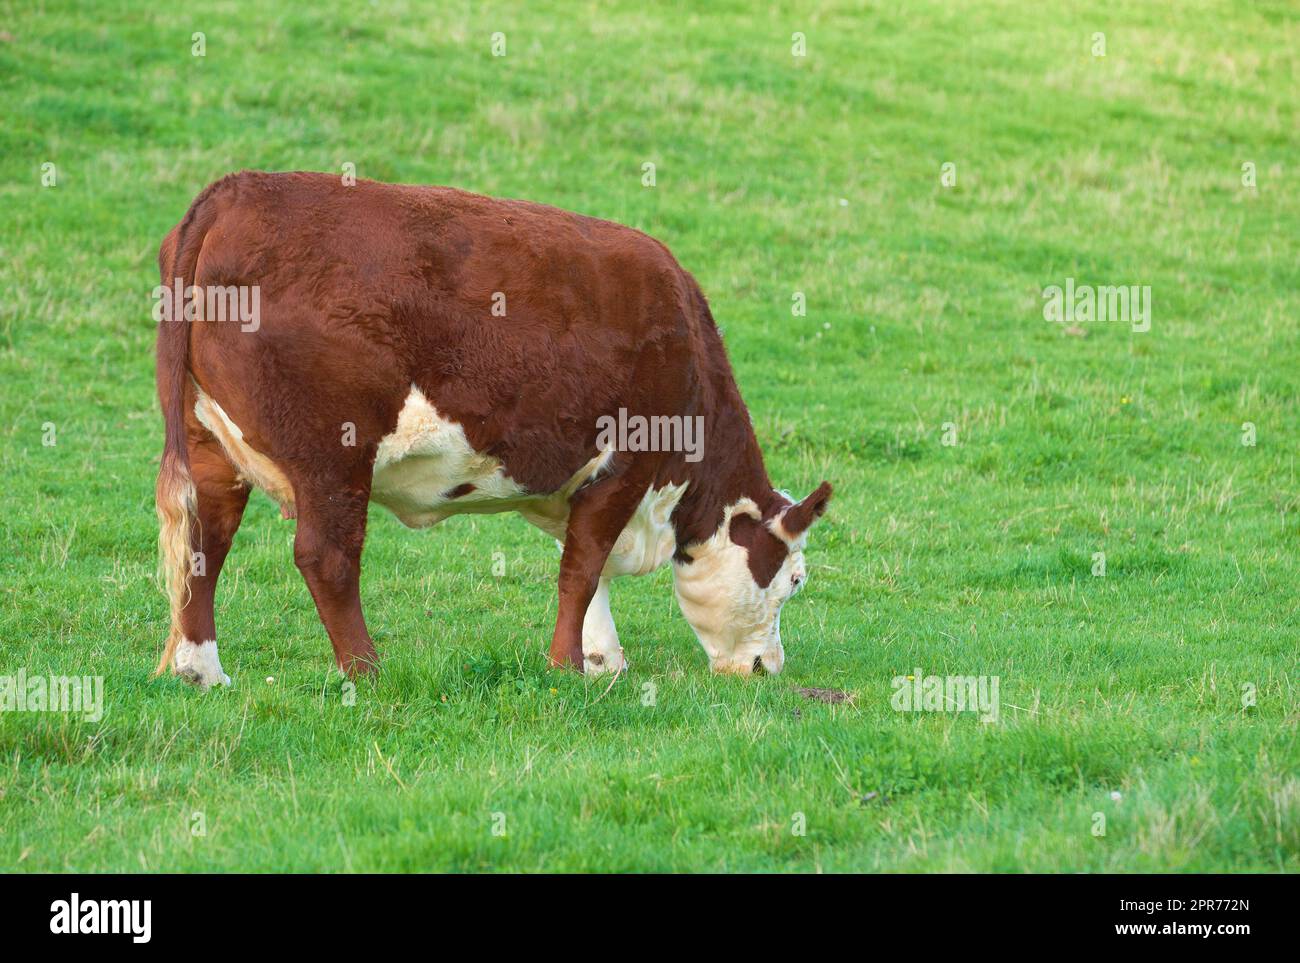 Breeding bovine animals for cattle farming on a meadow to produce milk or beef. Livestock grazing for food on open land in nature. Copy space with cow eating grass on a field on a sunny day outdoors Stock Photo